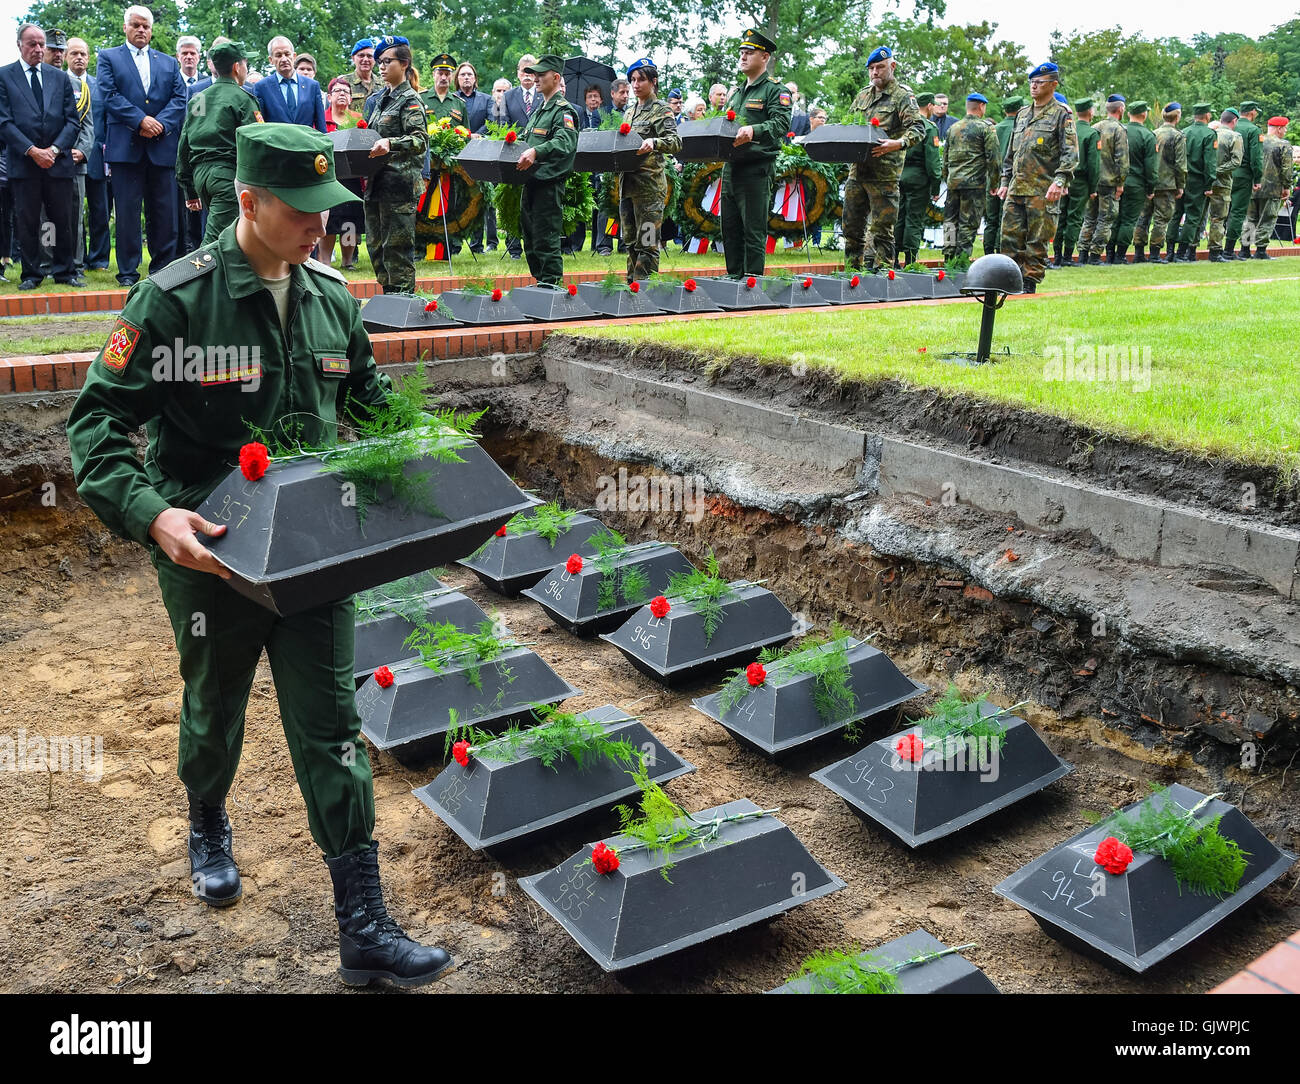 Lebus, Germany. 18th Aug, 2016. A Russian soldier places small coffins containing the remains of Soviet soldiers from the second world war into a grave, during their burial at the military cemetary in Lebus, Germany, 18 August 2016. The 35 red army soldiers died in the heavy fighting in the Oderbruch area in early 1945. The mortal remains were recovered by the German War Graves Commission last year, and can now finally be laid to rest, more than 70 years after the war's end. PHOTO: PATRICK PLEUL/DPA/Alamy Live News Stock Photo